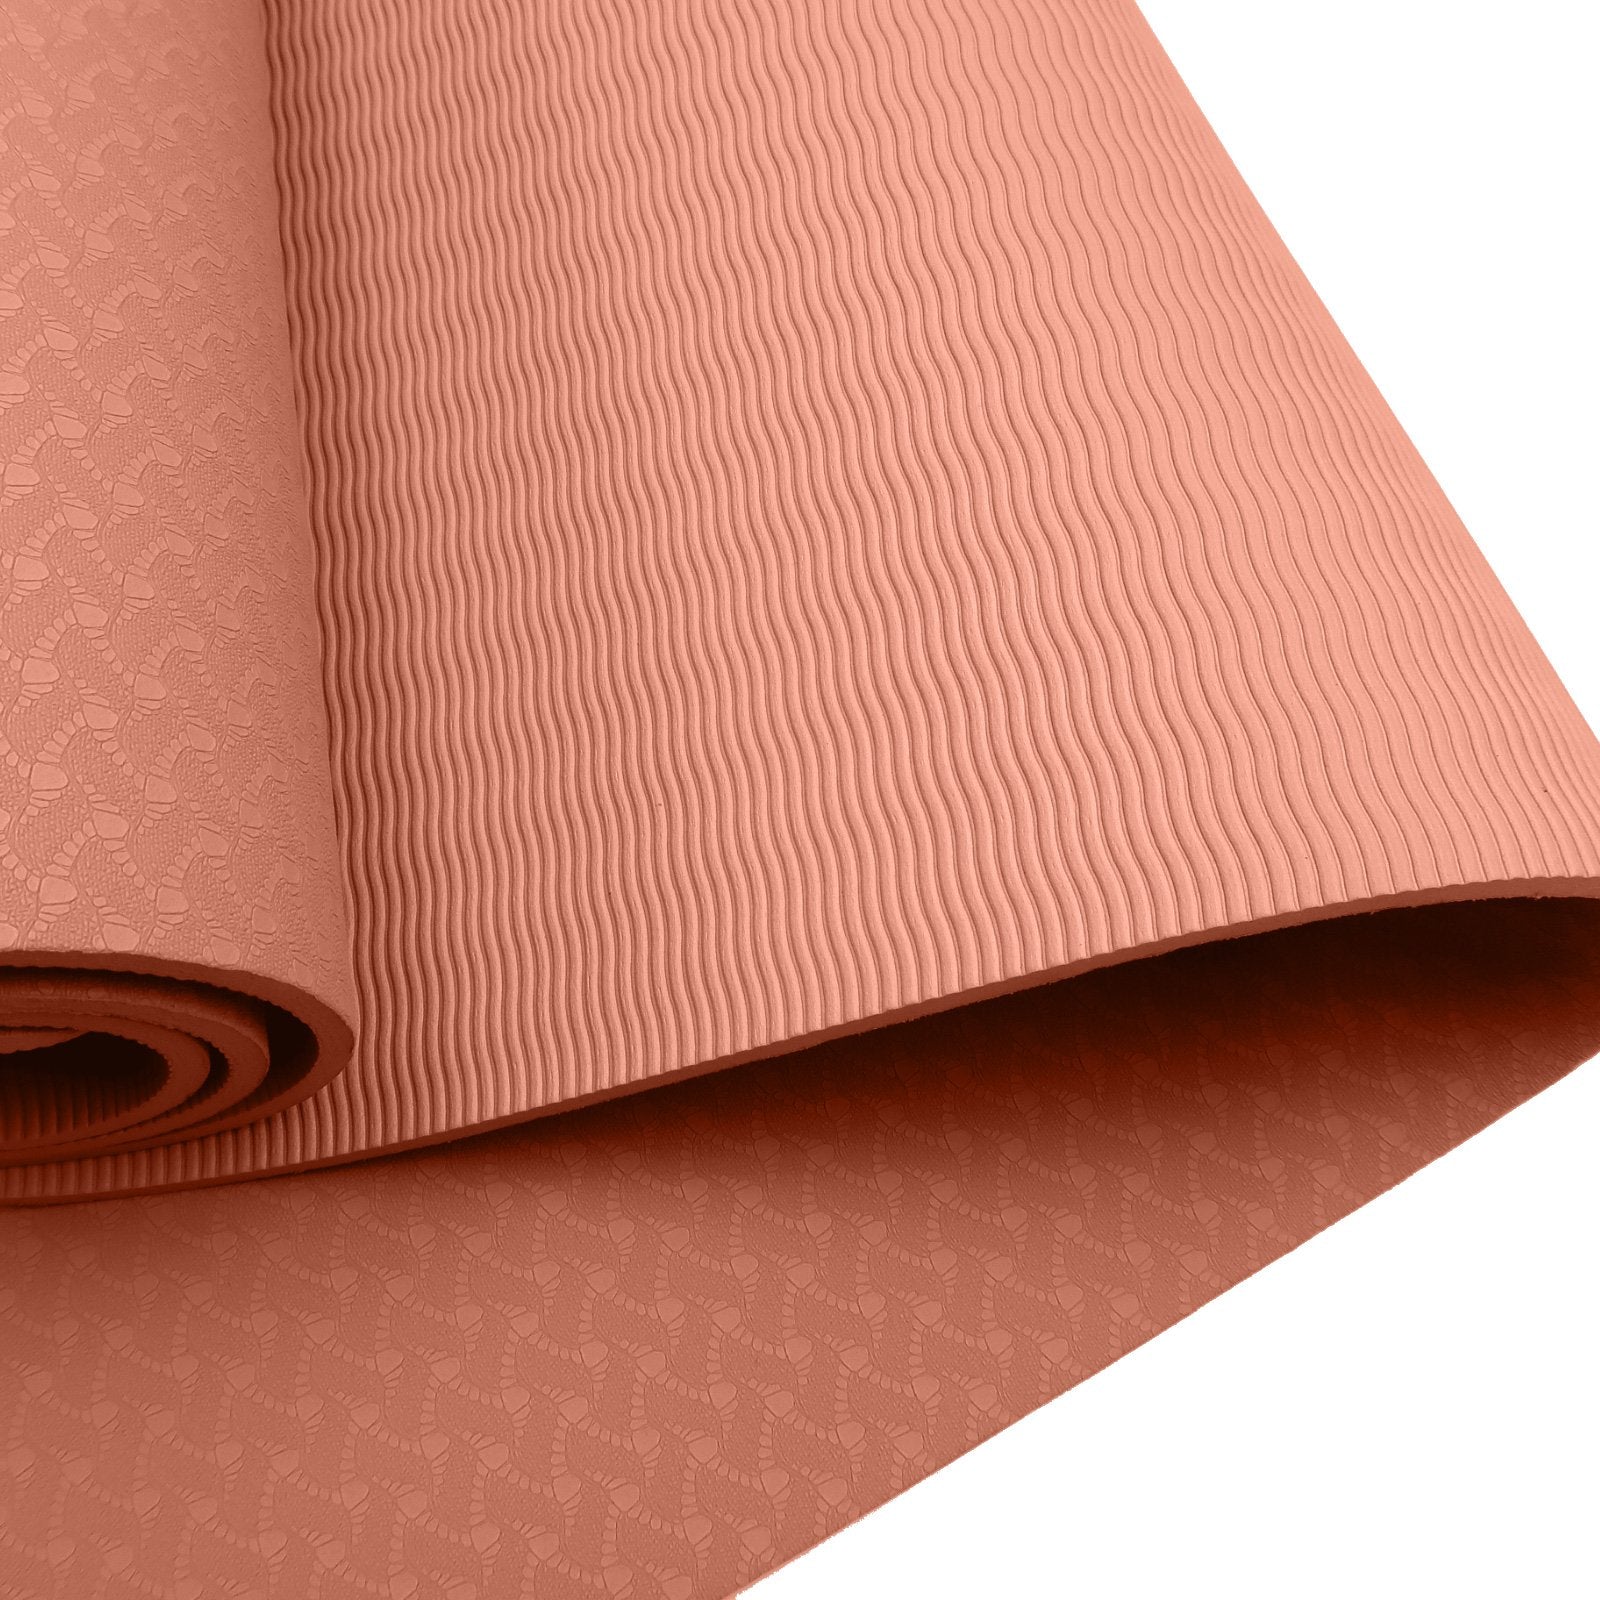 Eco-friendly Dual Layer 6mm Yoga Mat | Peach | Non-slip Surface And Carry Strap For Ultimate Comfort And Portability